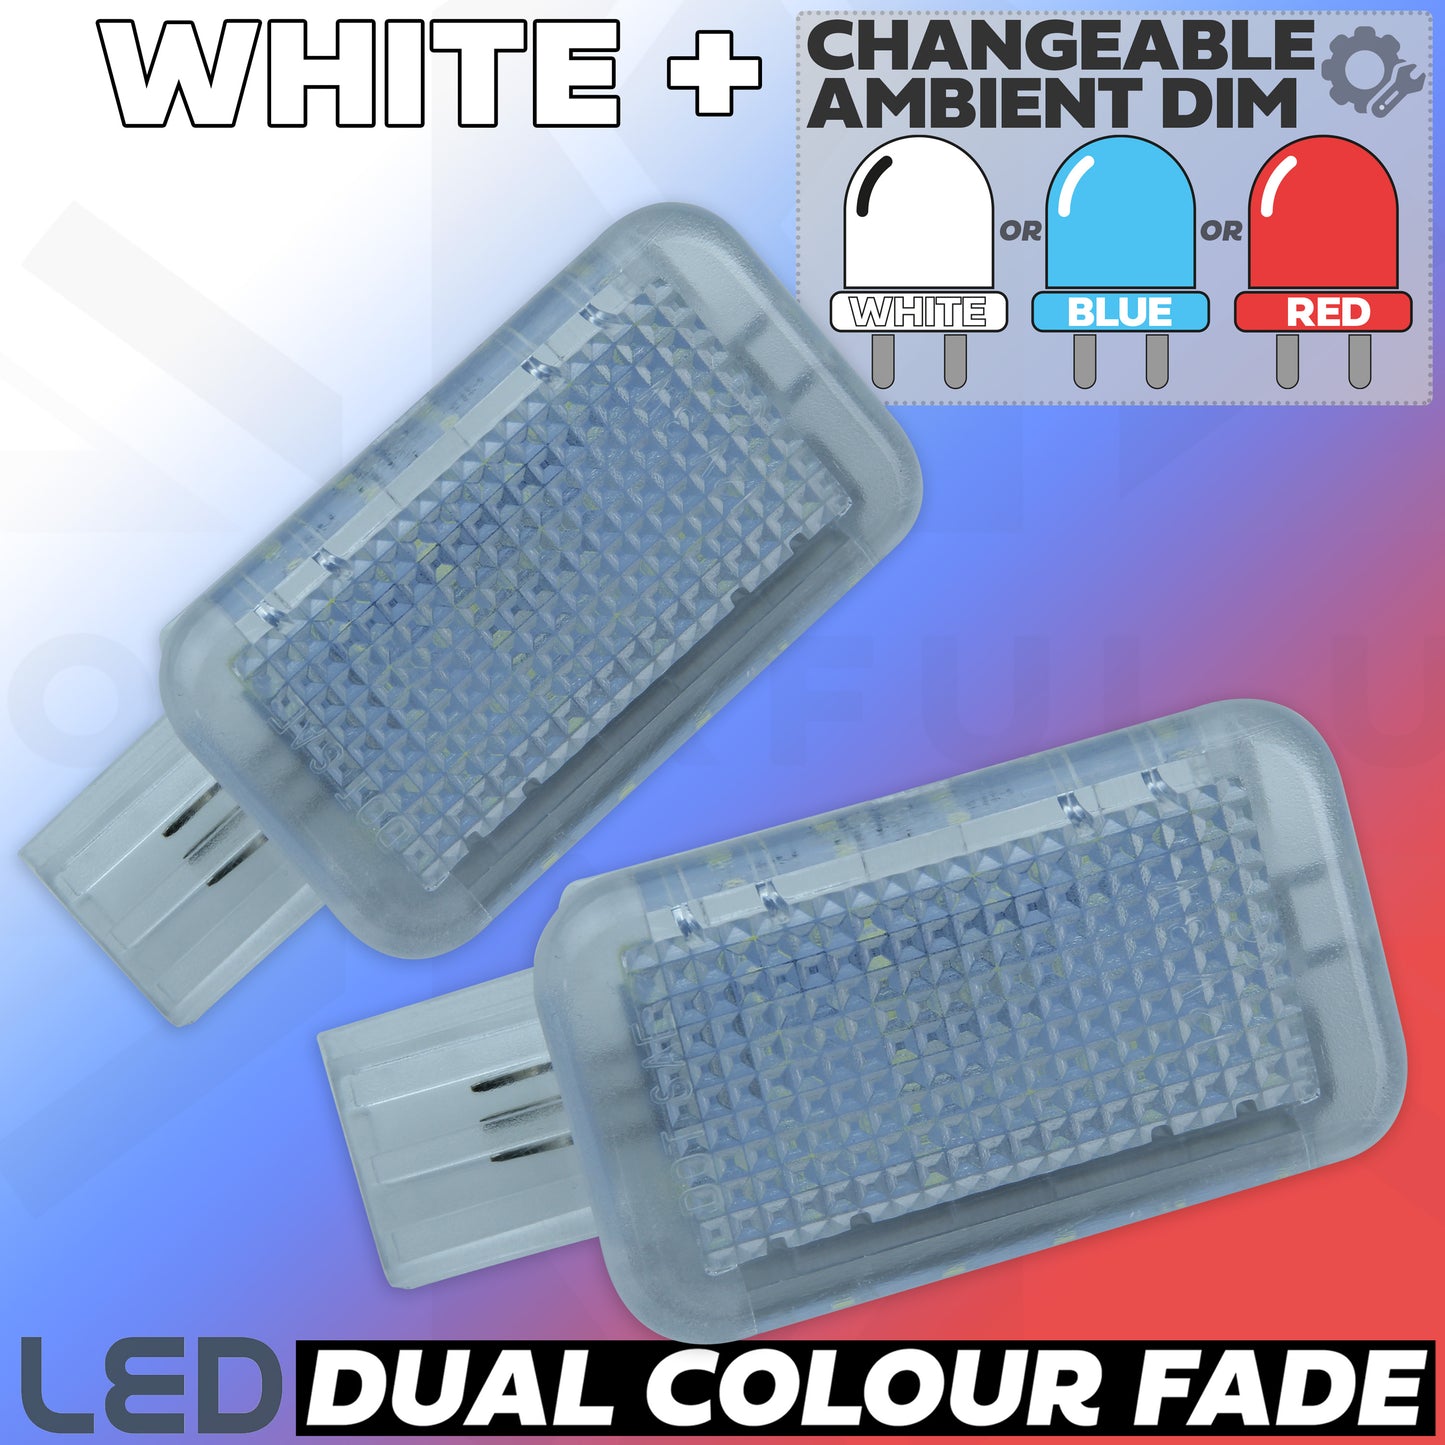 WHITE-RED-BLUE LED interior Footwell ambient lamp upgrade for Range Rover Velar  (2pc)